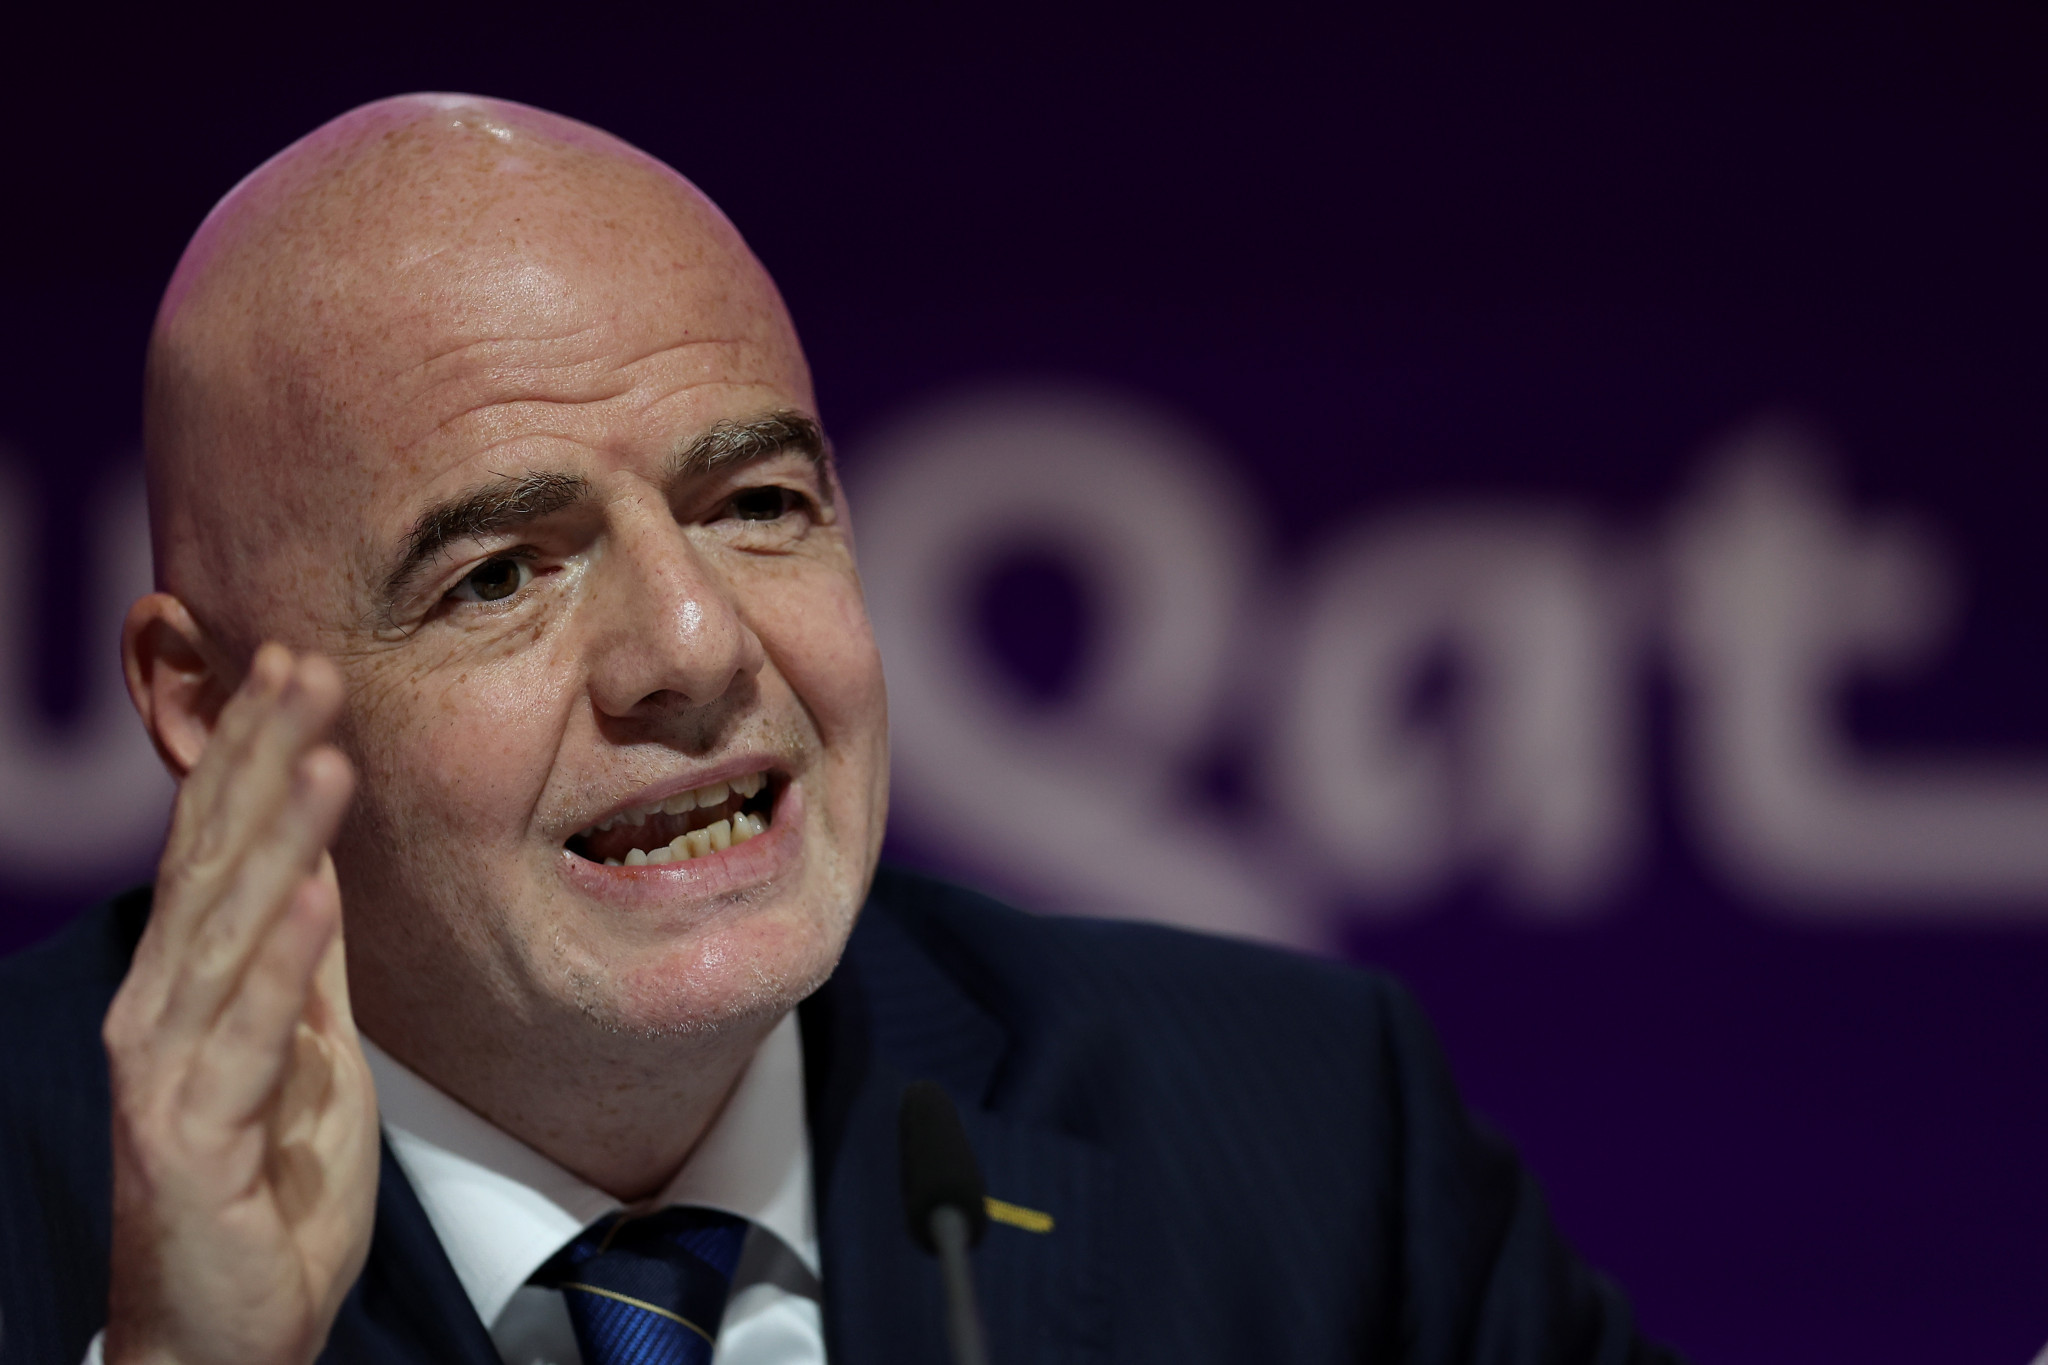 Infantino criticises Western "hypocrisy" and claims "I feel gay" in angry monologue